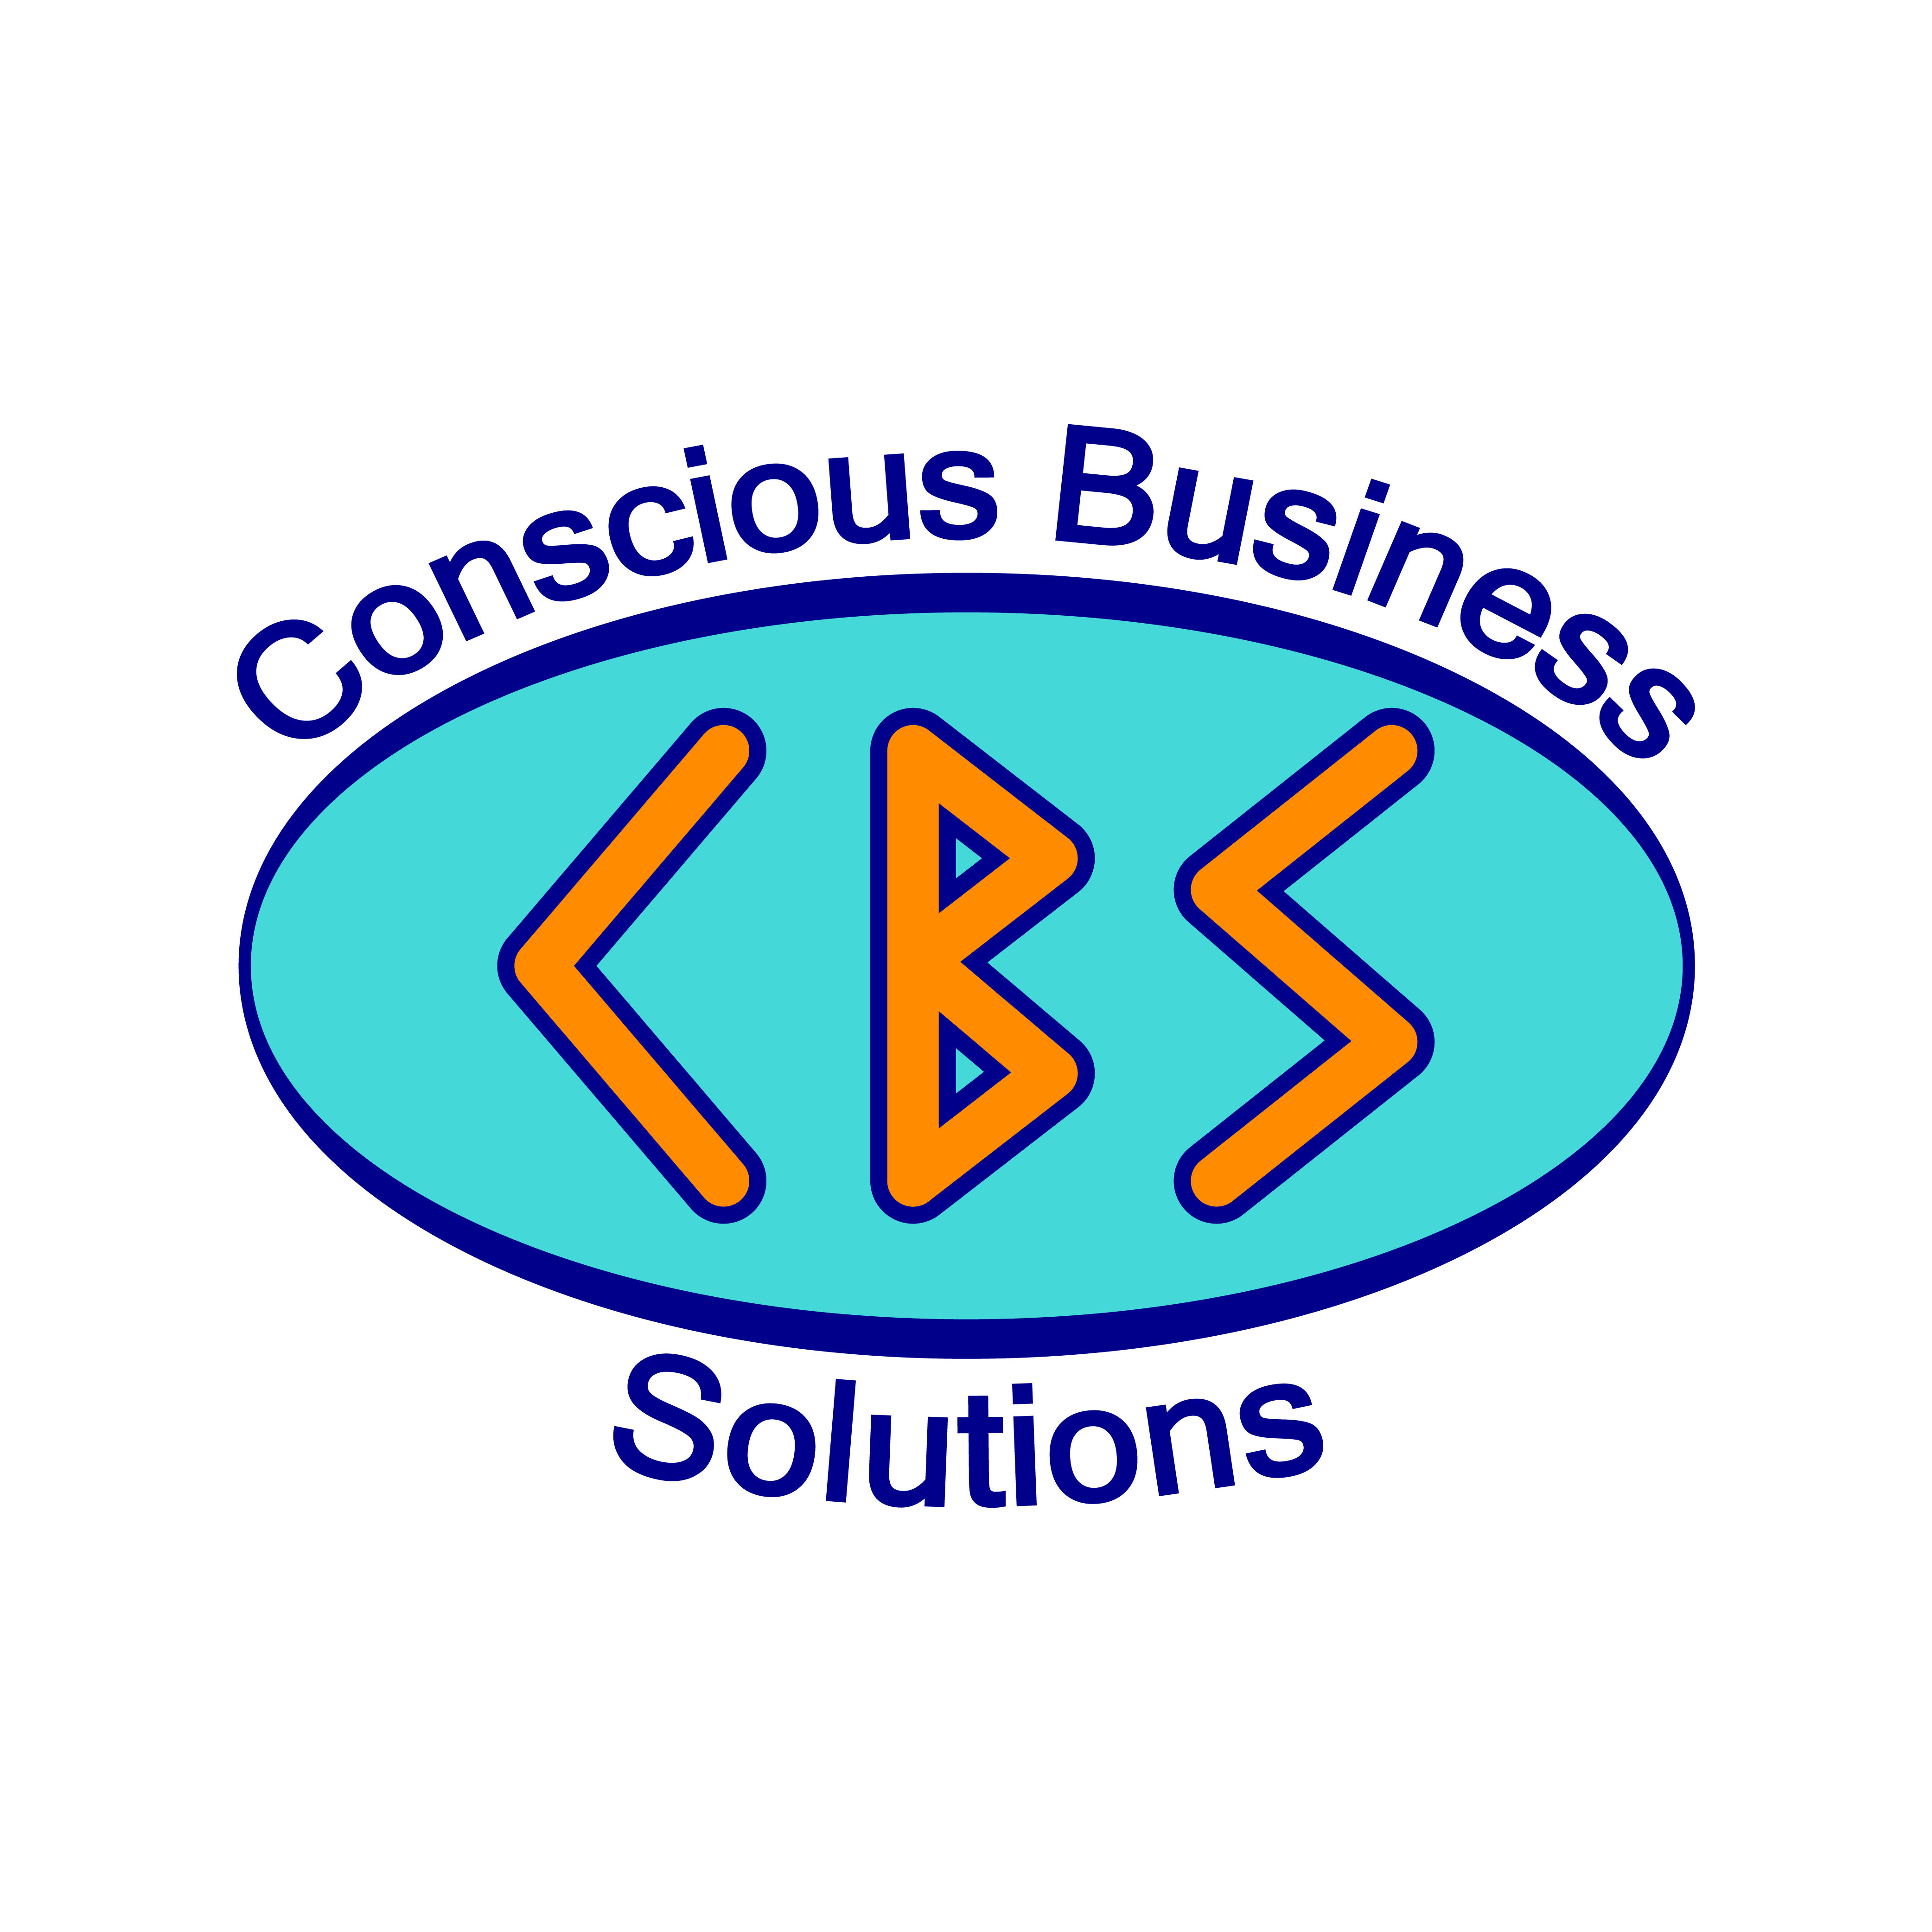 Company logo image - Conscious Business Solutions